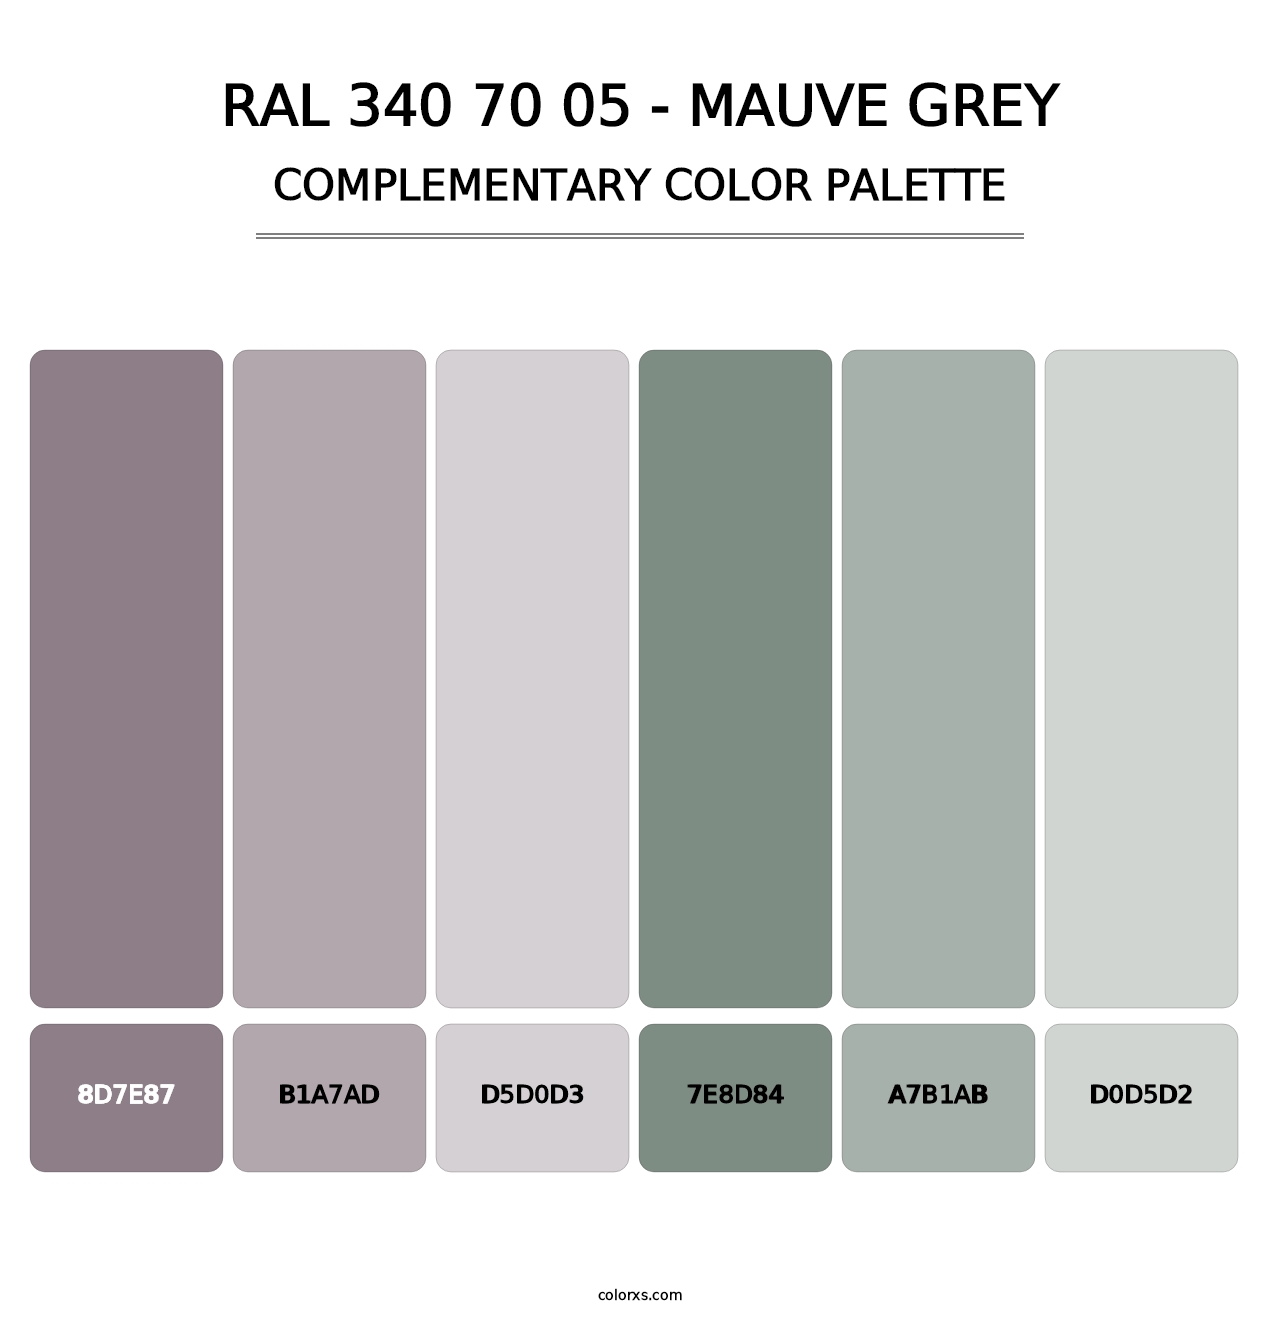 RAL 340 70 05 - Mauve Grey - Complementary Color Palette